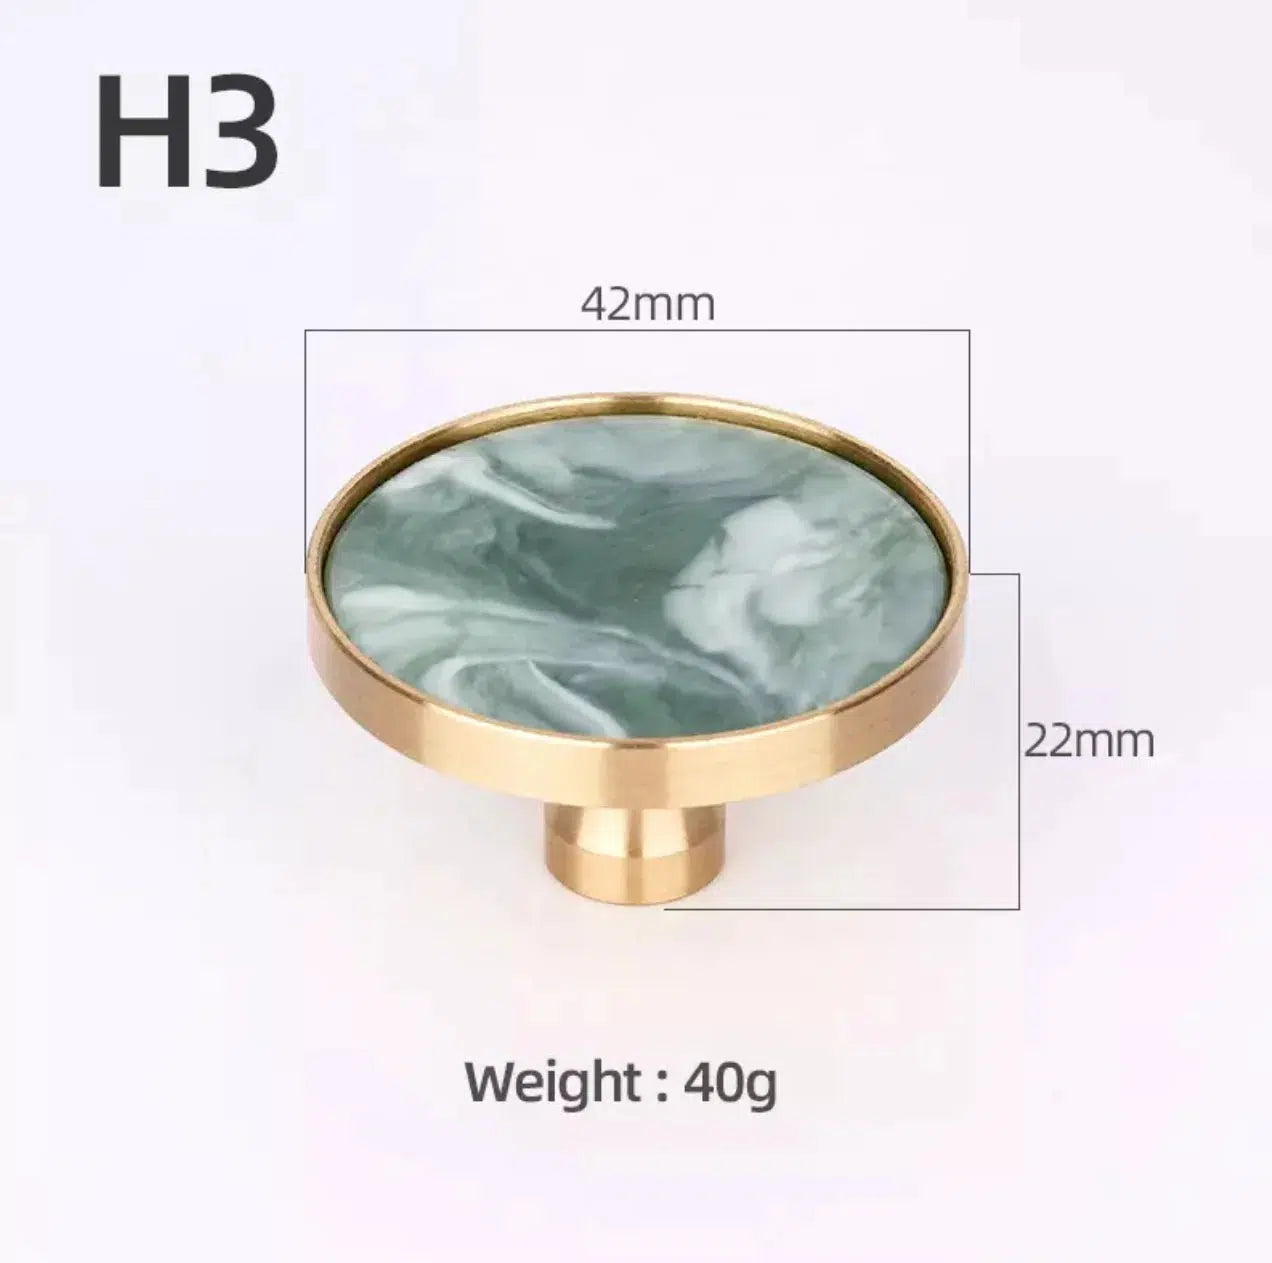 Brass and Stone Handles Hestia + Co. H 3 